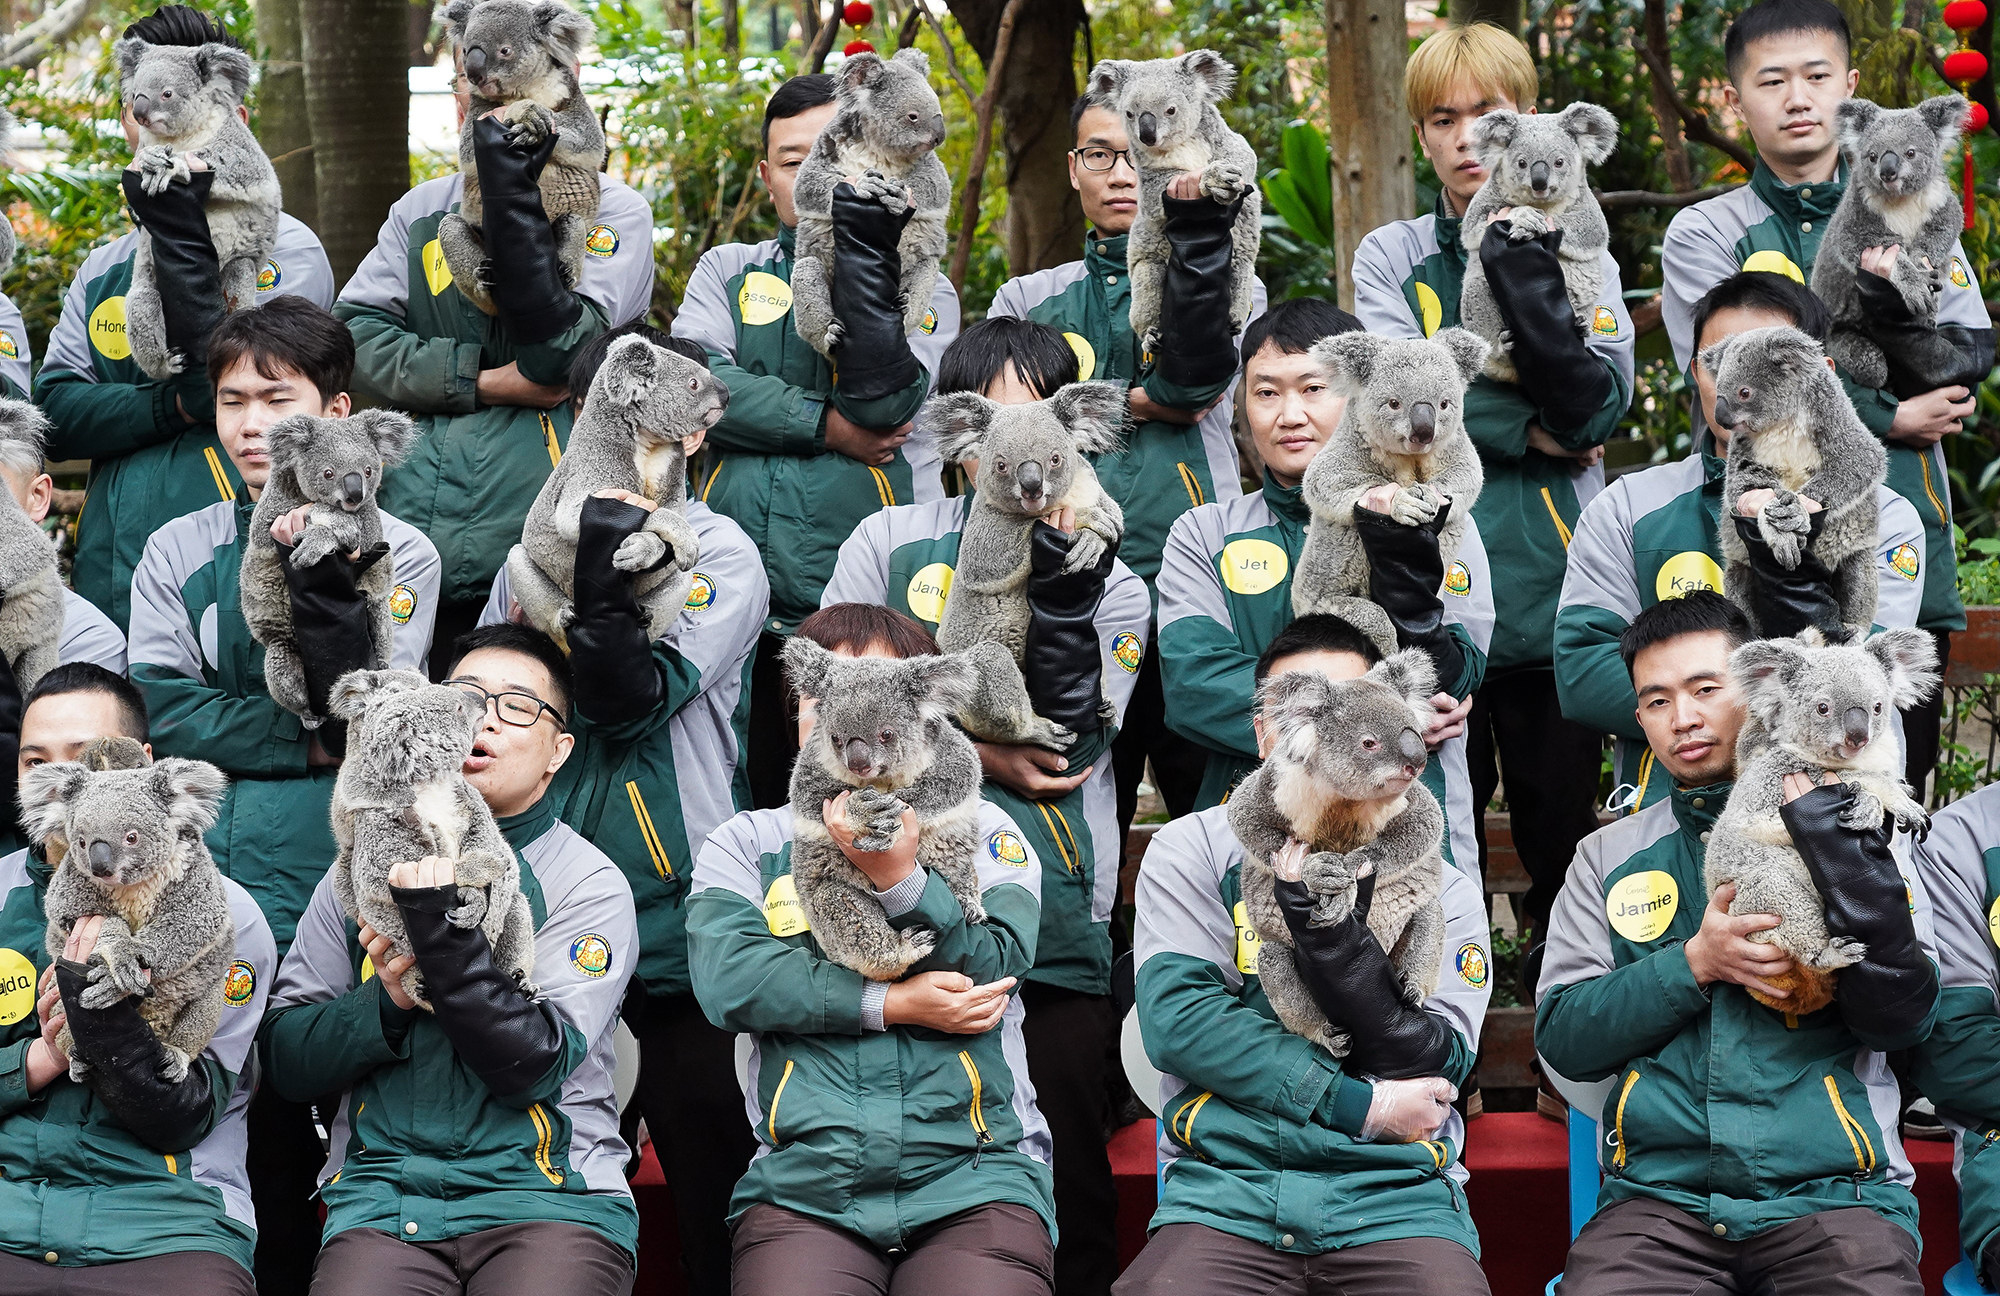 A posse of zoo breeders in green windbreakers hold up koalas for a group photo.